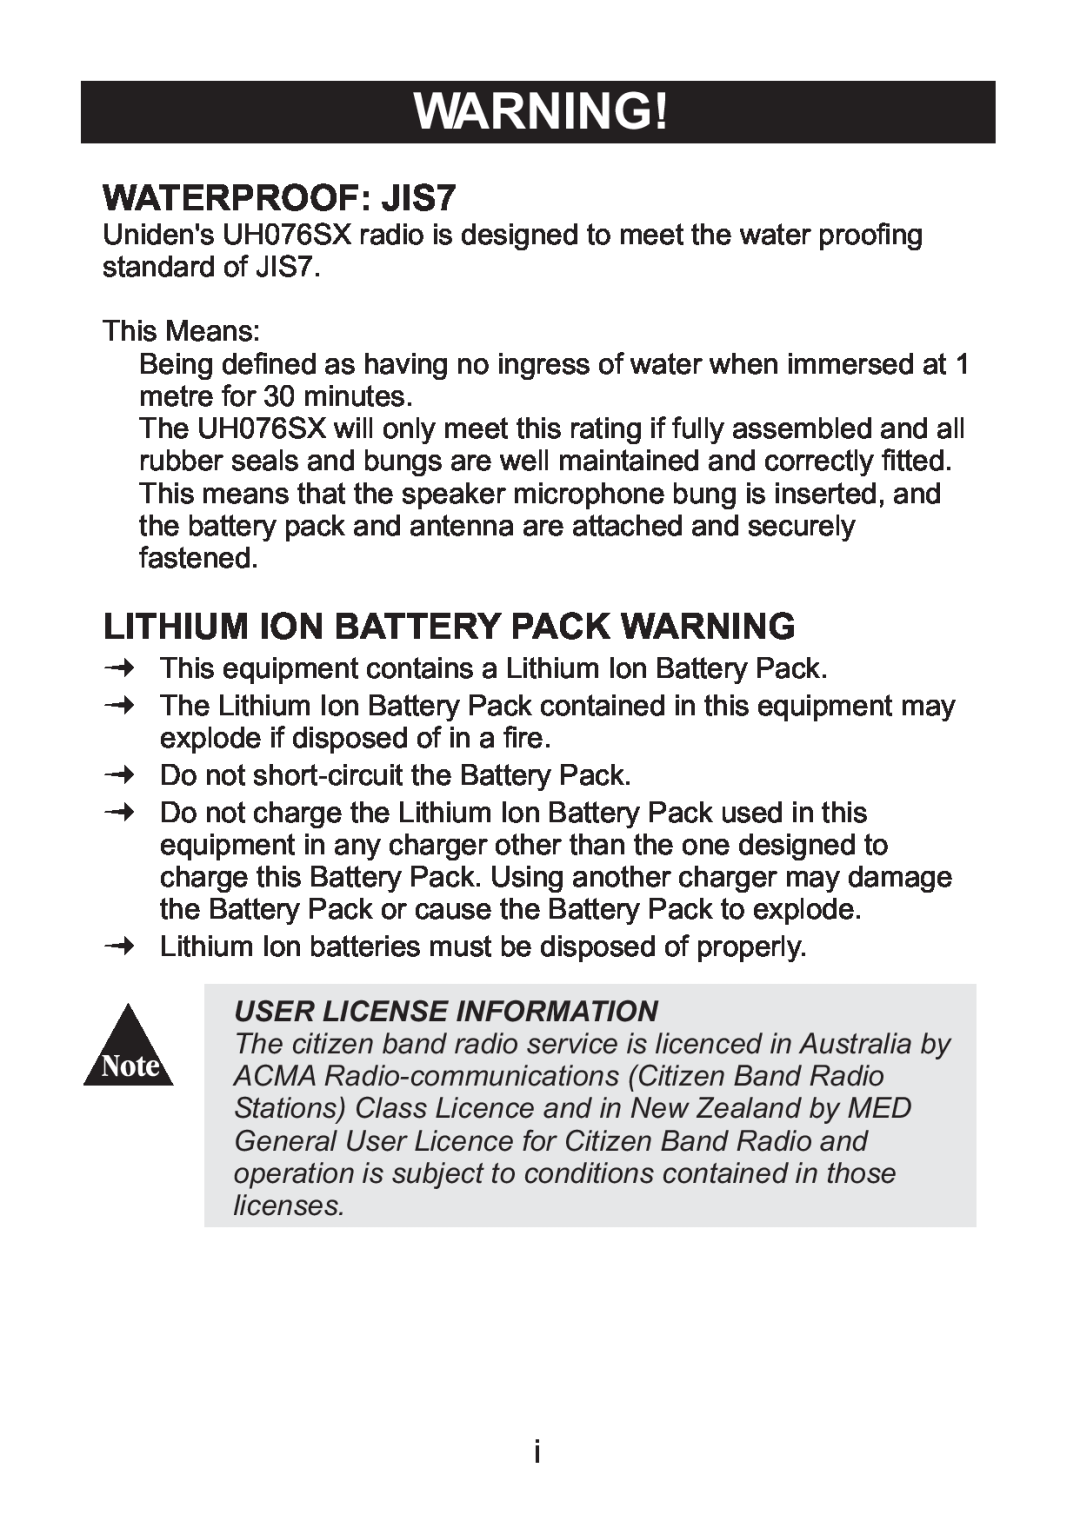 Uniden UH076SX owner manual WATERPROOF JIS7, Lithium Ion Battery Pack Warning, User License Information 